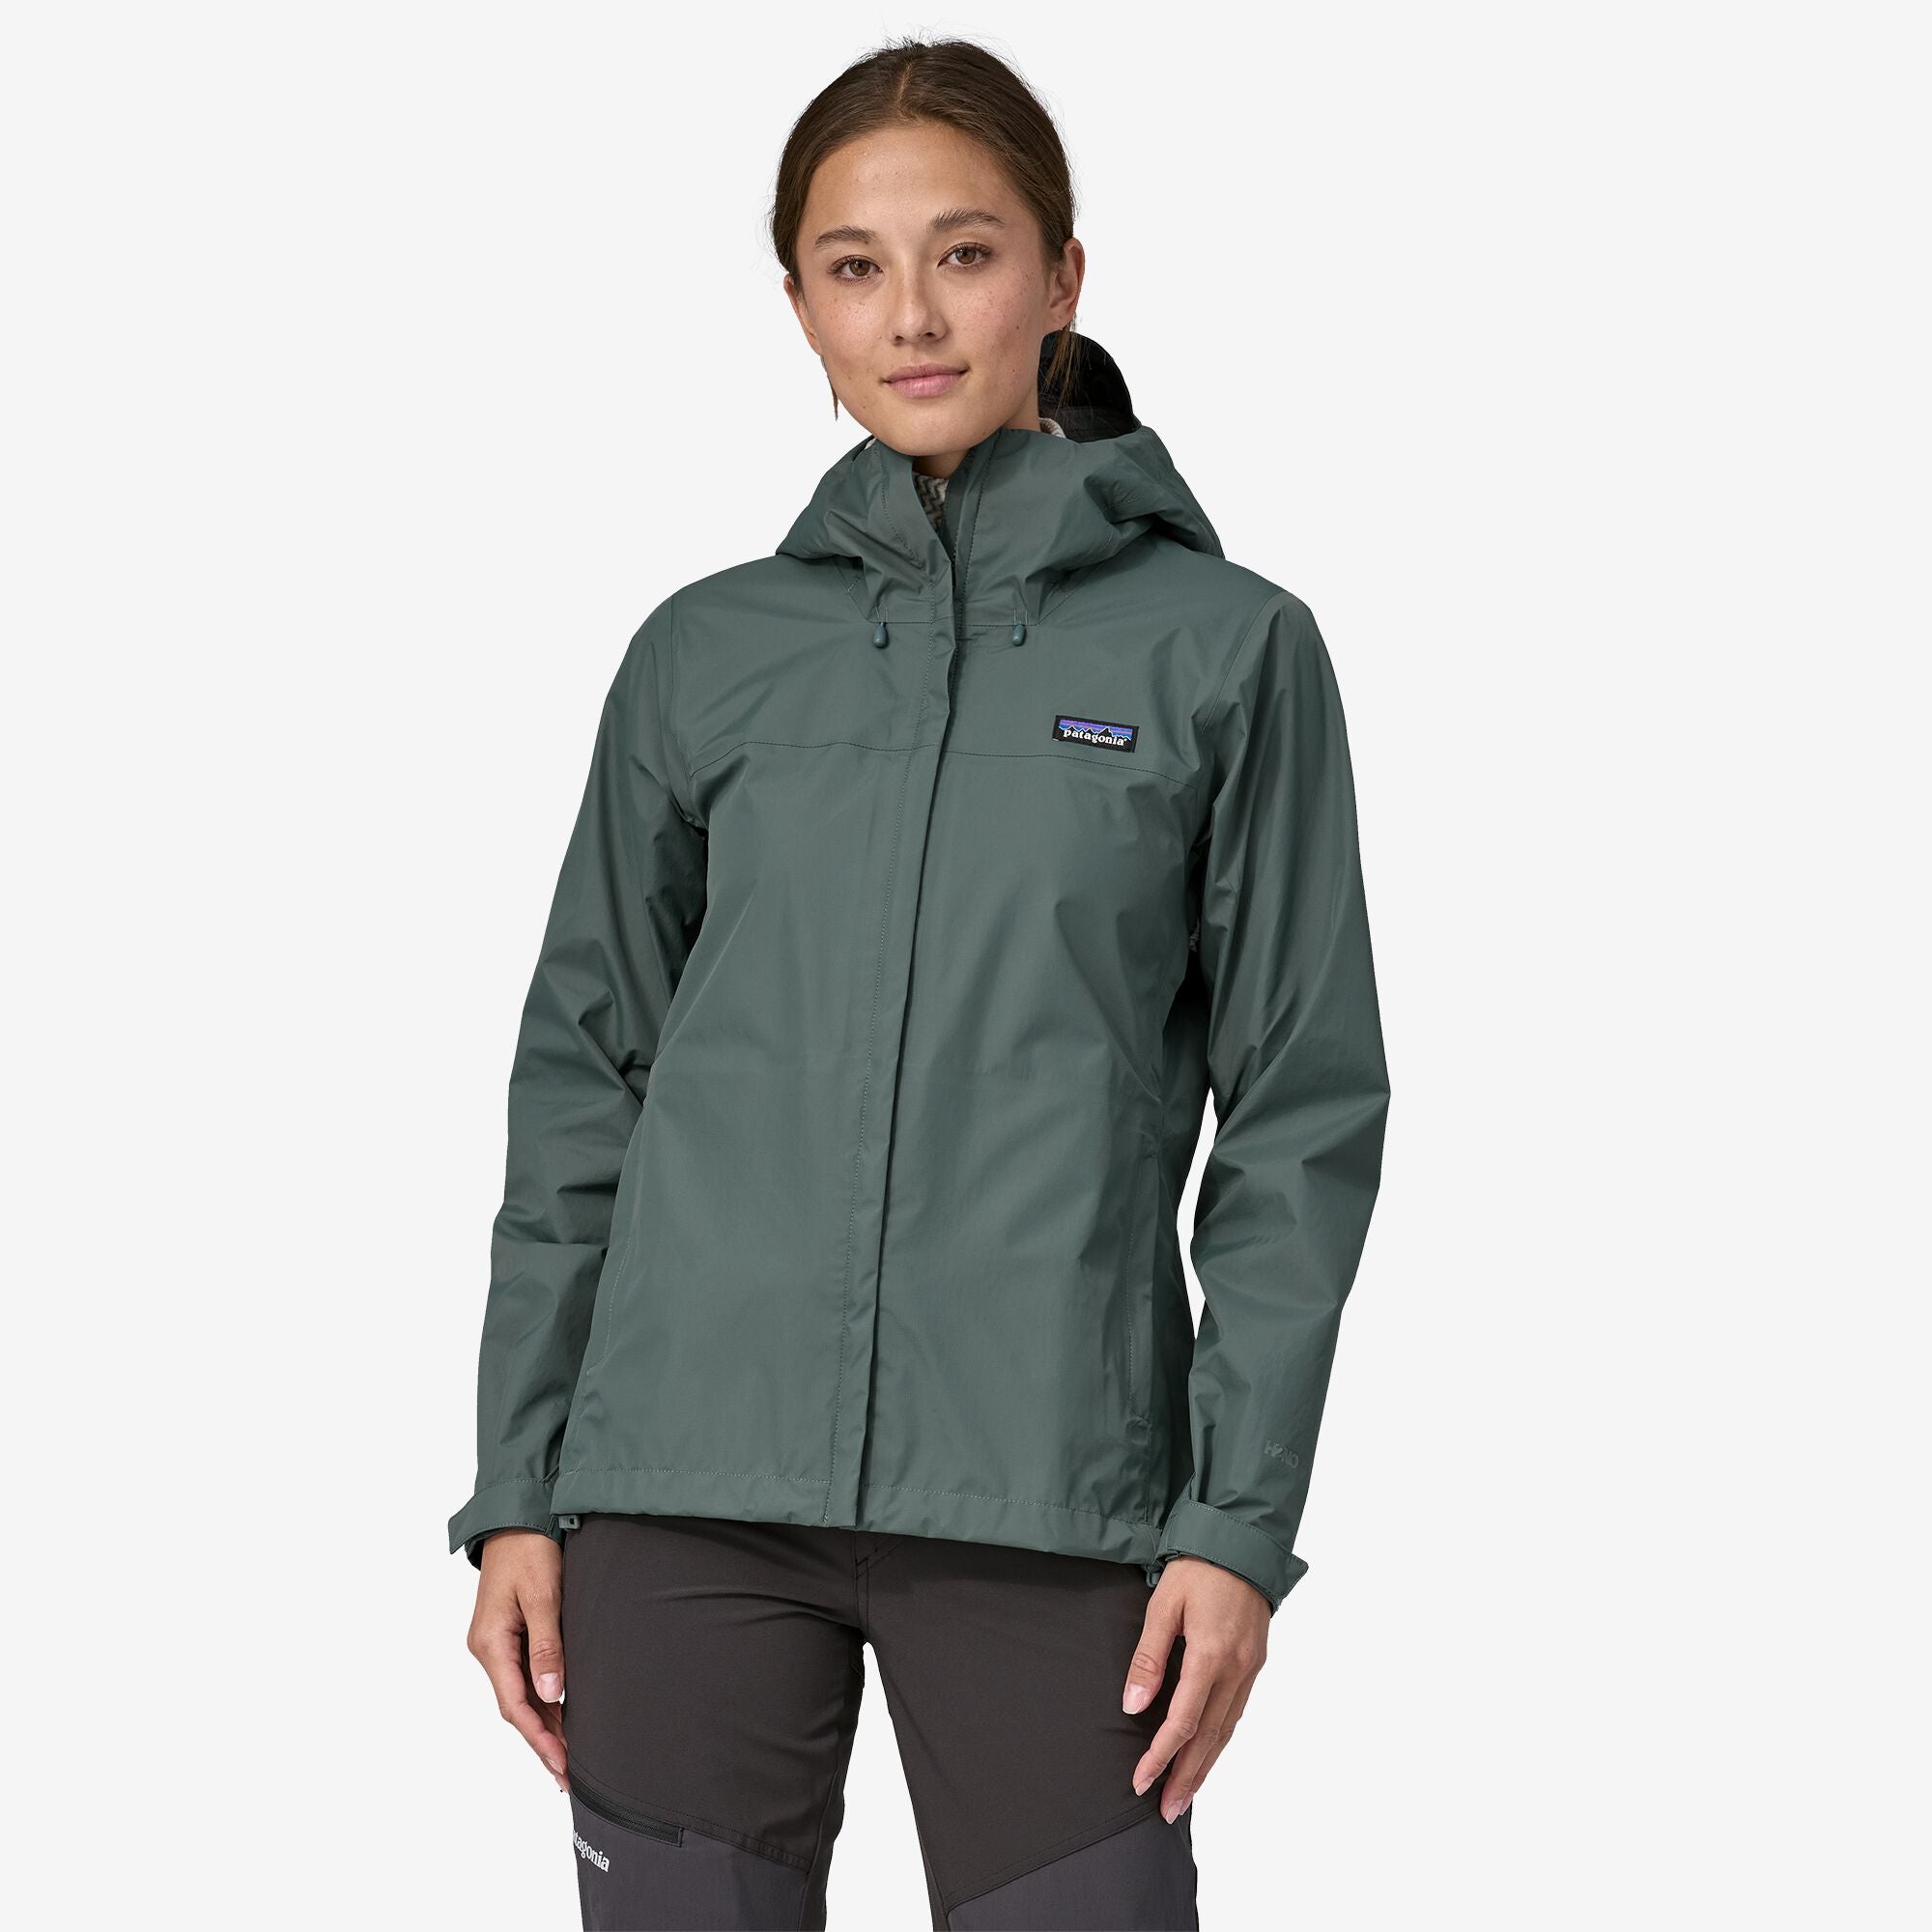 Chaqueta Impermeable Mujer Torrentshell 3L Jacket